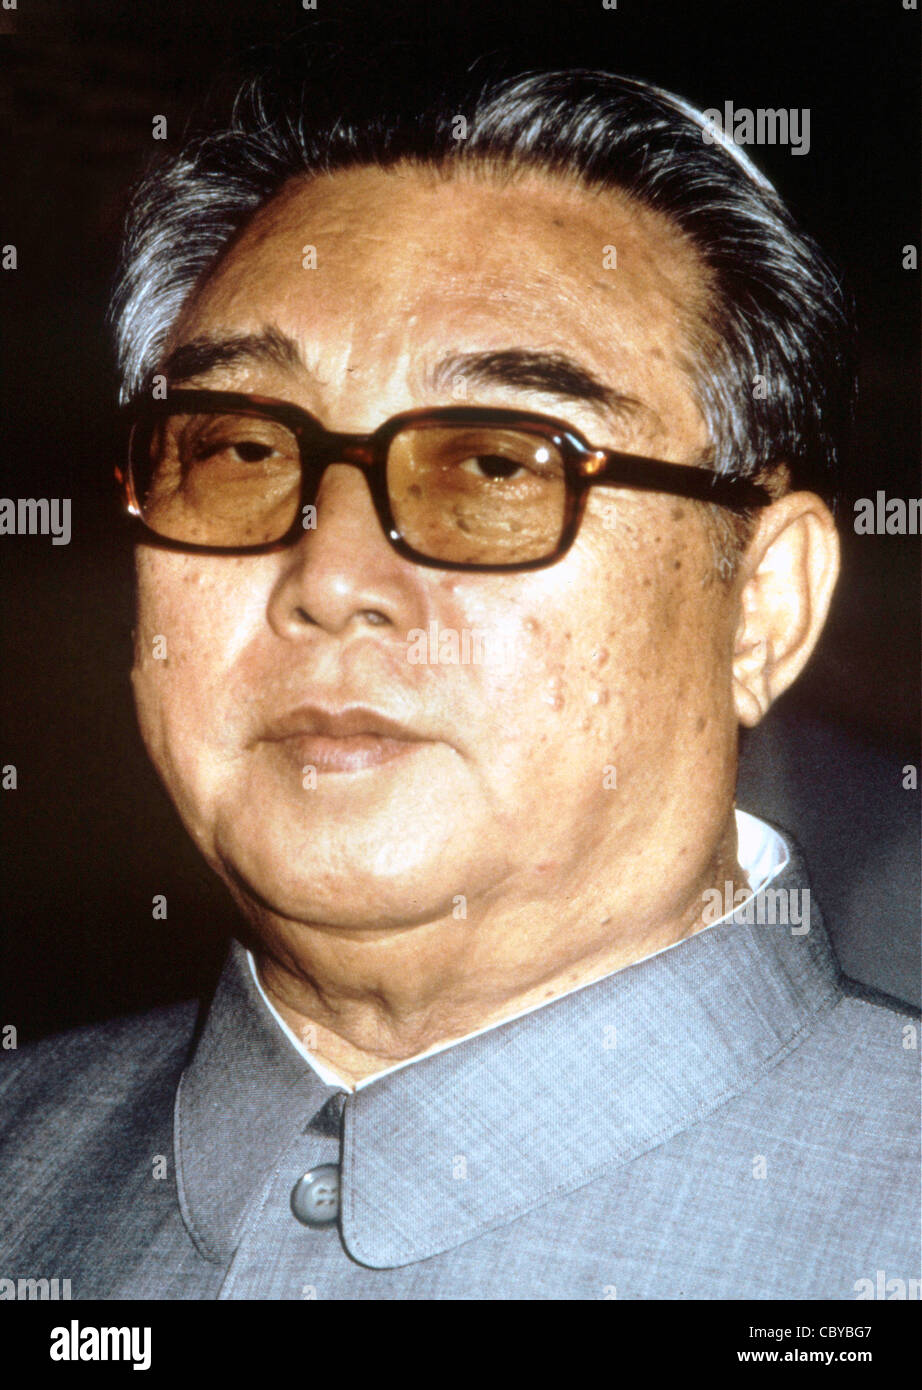 Kim Il Sung - Founders and first president of the communist state of the North Korea. Stock Photo